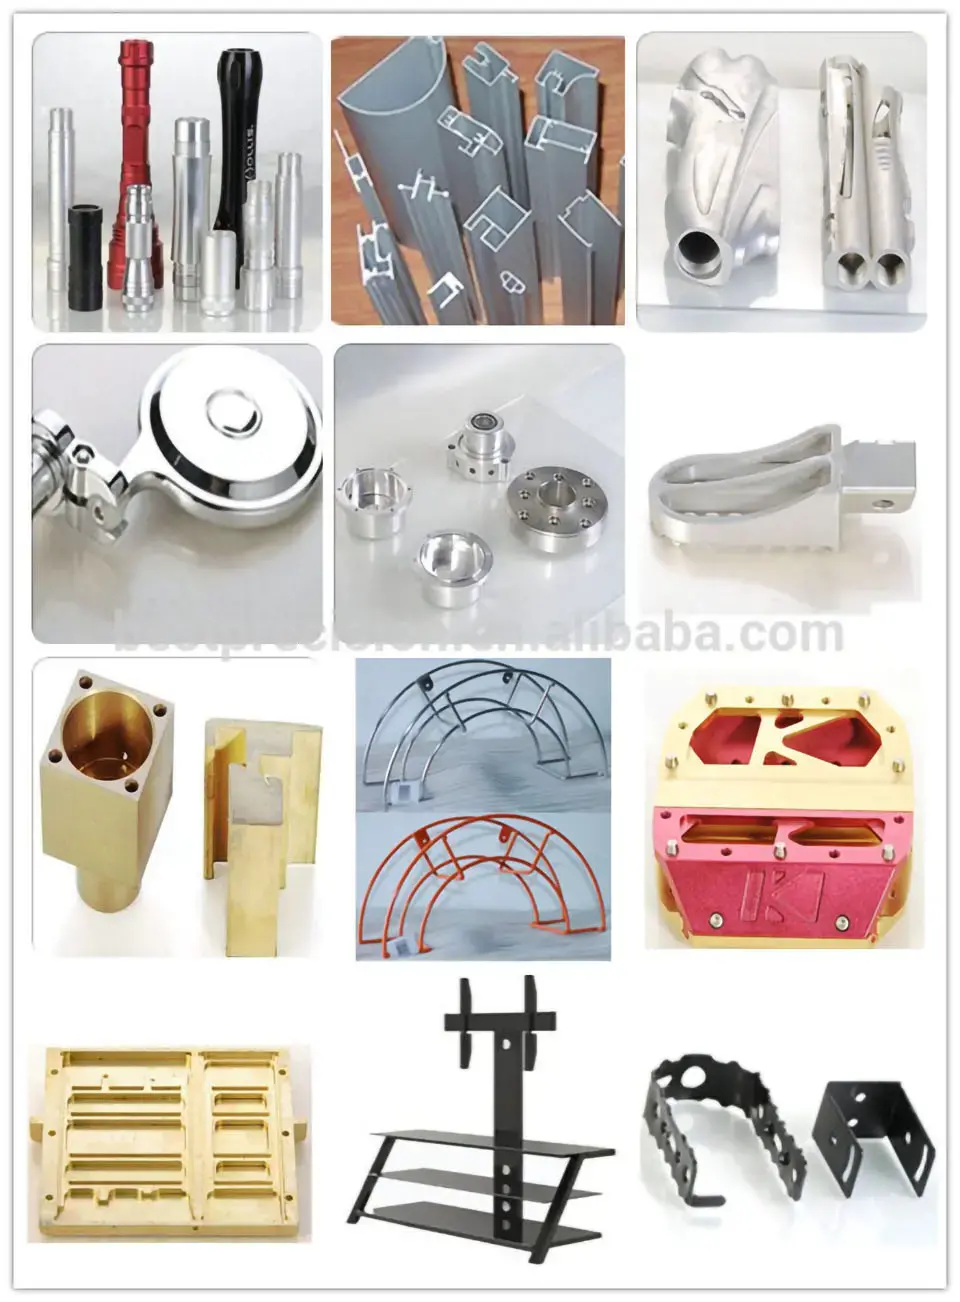 Competitive Price extrusion Shop in Shenzhen